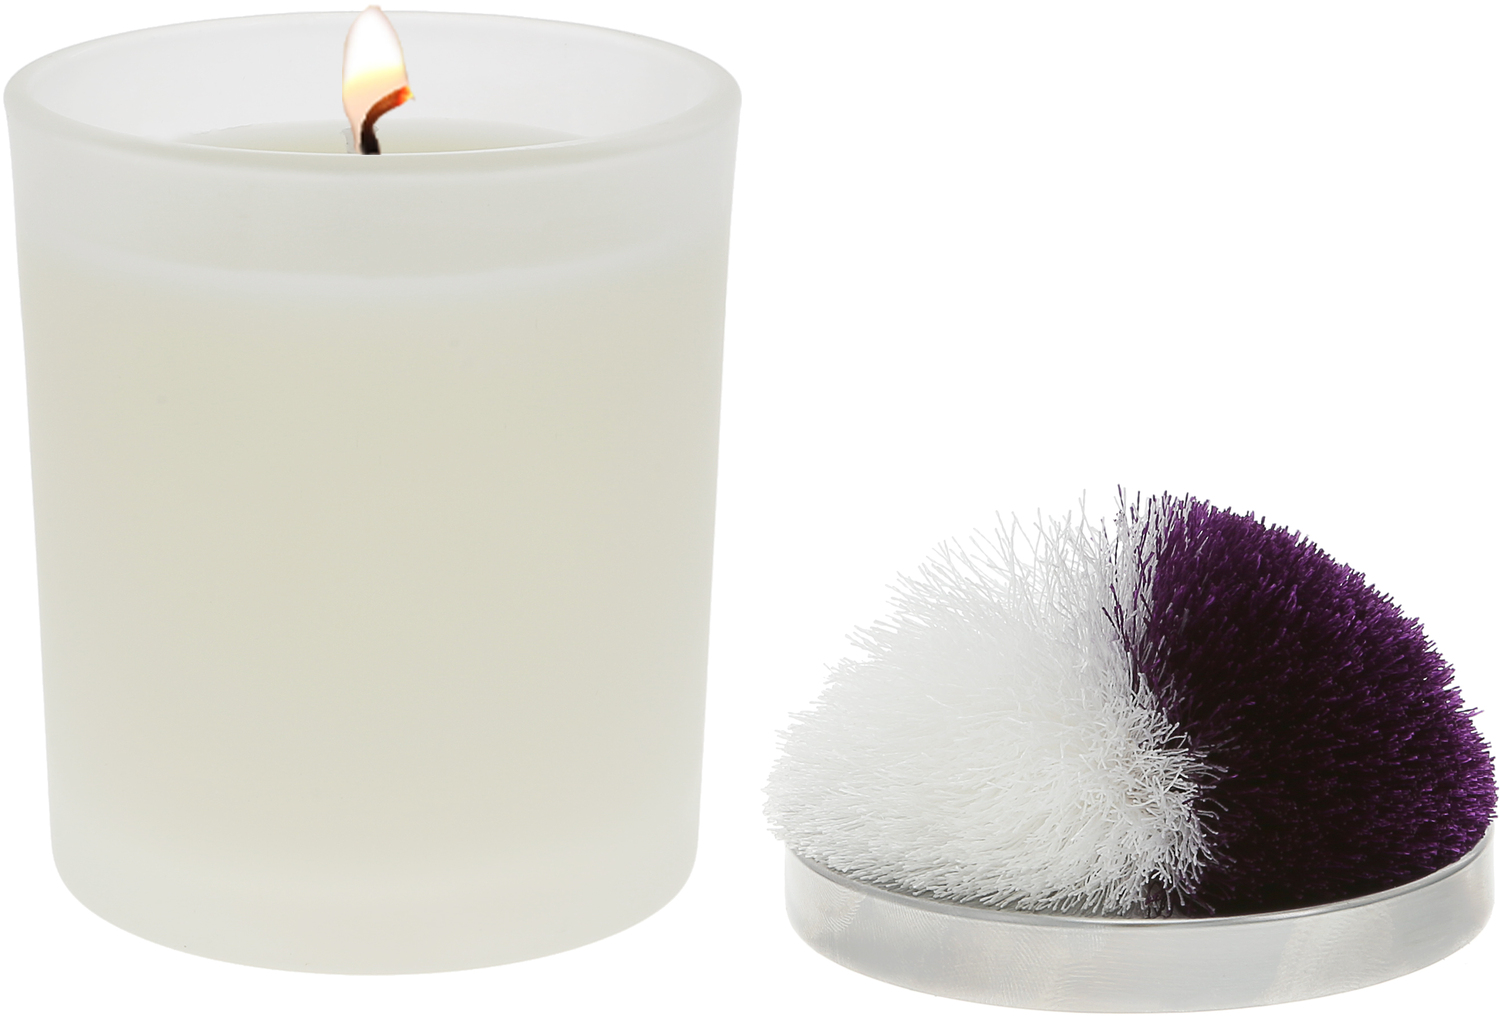 Blank - Purple & White by Repre-Scent - Blank - Purple & White - 5.5 oz - 100% Soy Wax Candle with Pom Pom Lid
Scent: Tranquility